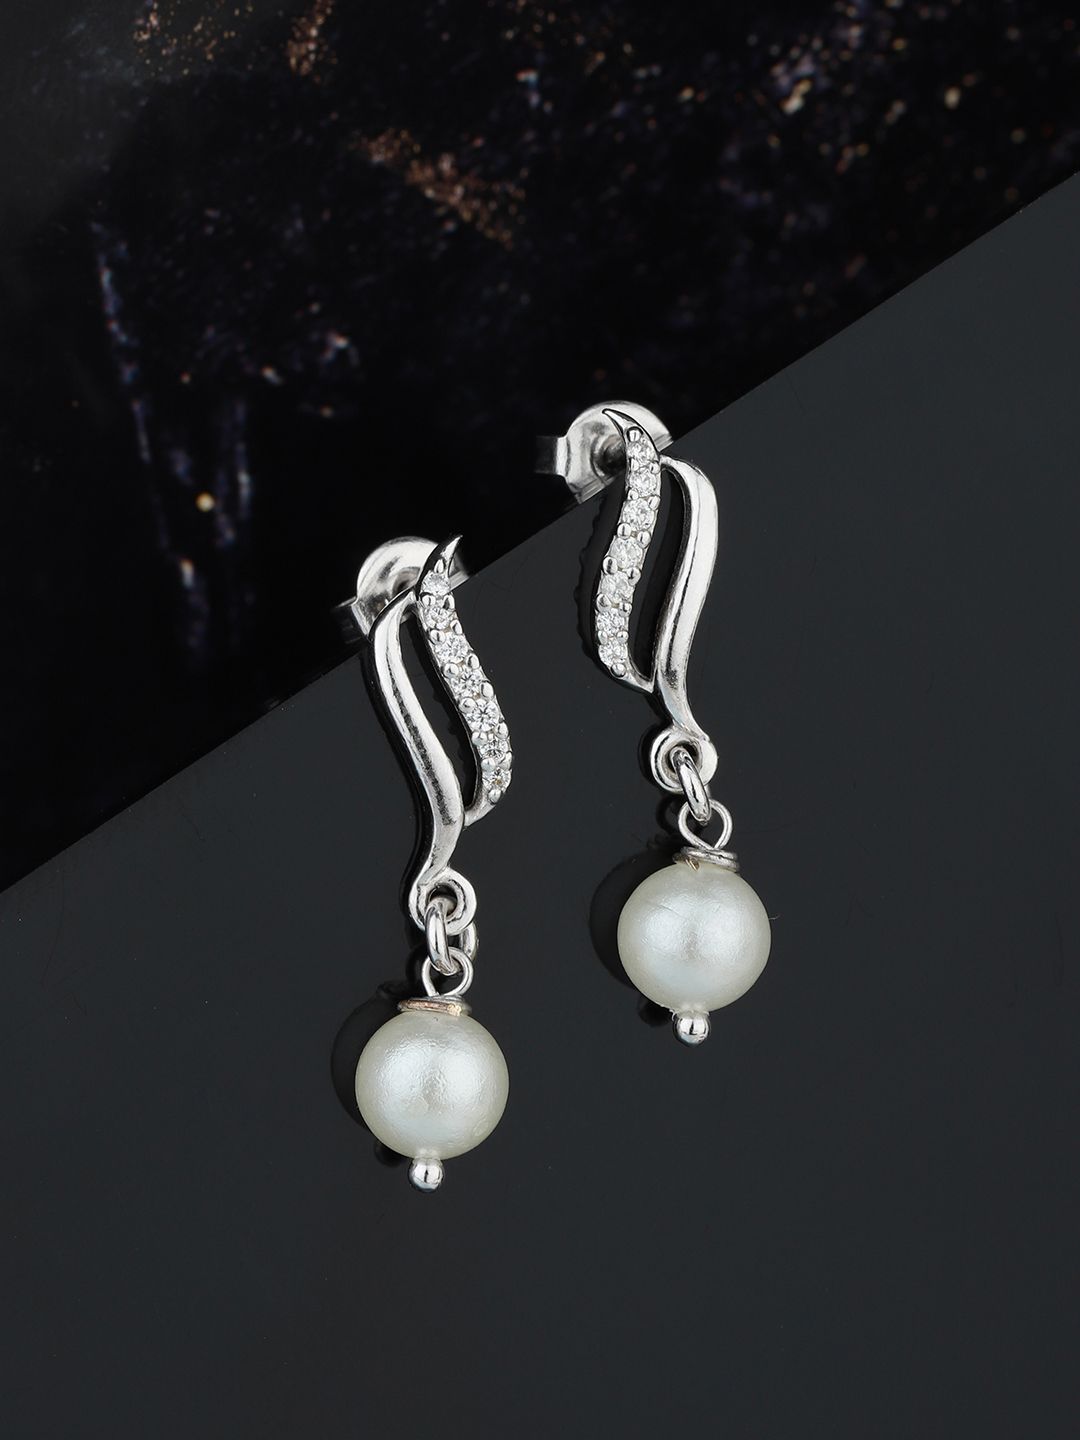 Carlton London Silver-Toned & White Rhodium-Plated Stone-Studded Beaded Drop Earrings Price in India